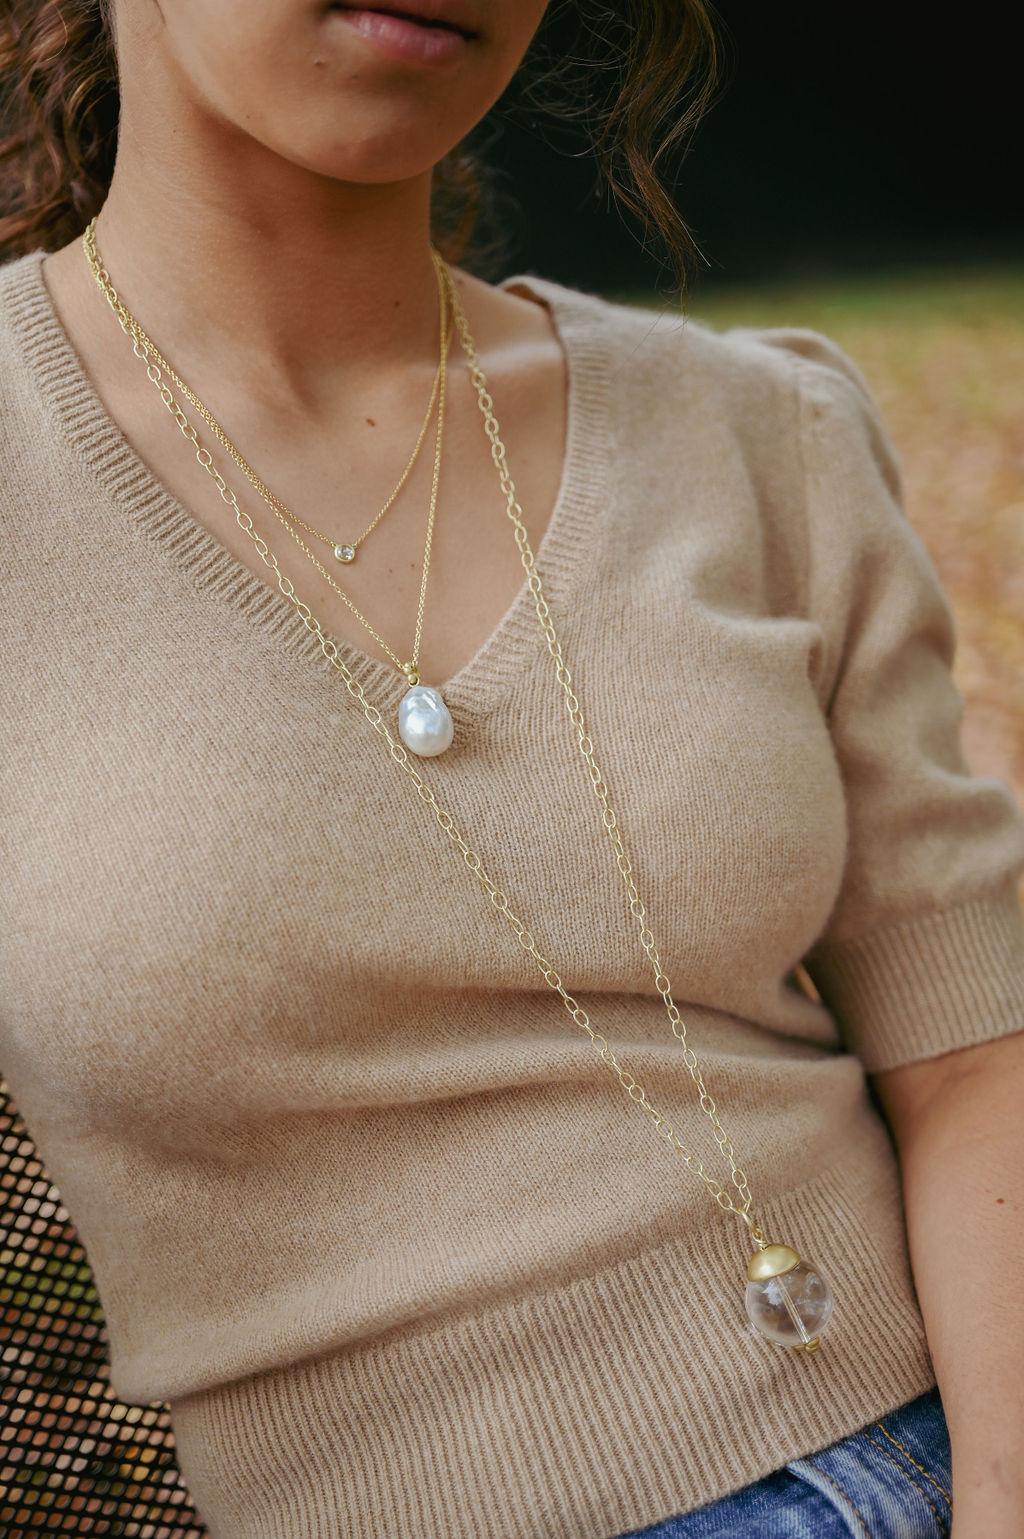 Known as the Master Healer, Rock Crystal Quartz is a natural clear gemstone believed to amplify energy as one of the most powerful healing stones. The beauty of Faye Kim's clear rock crystal quartz orb is enhanced by a clean 18 karat matte gold cap